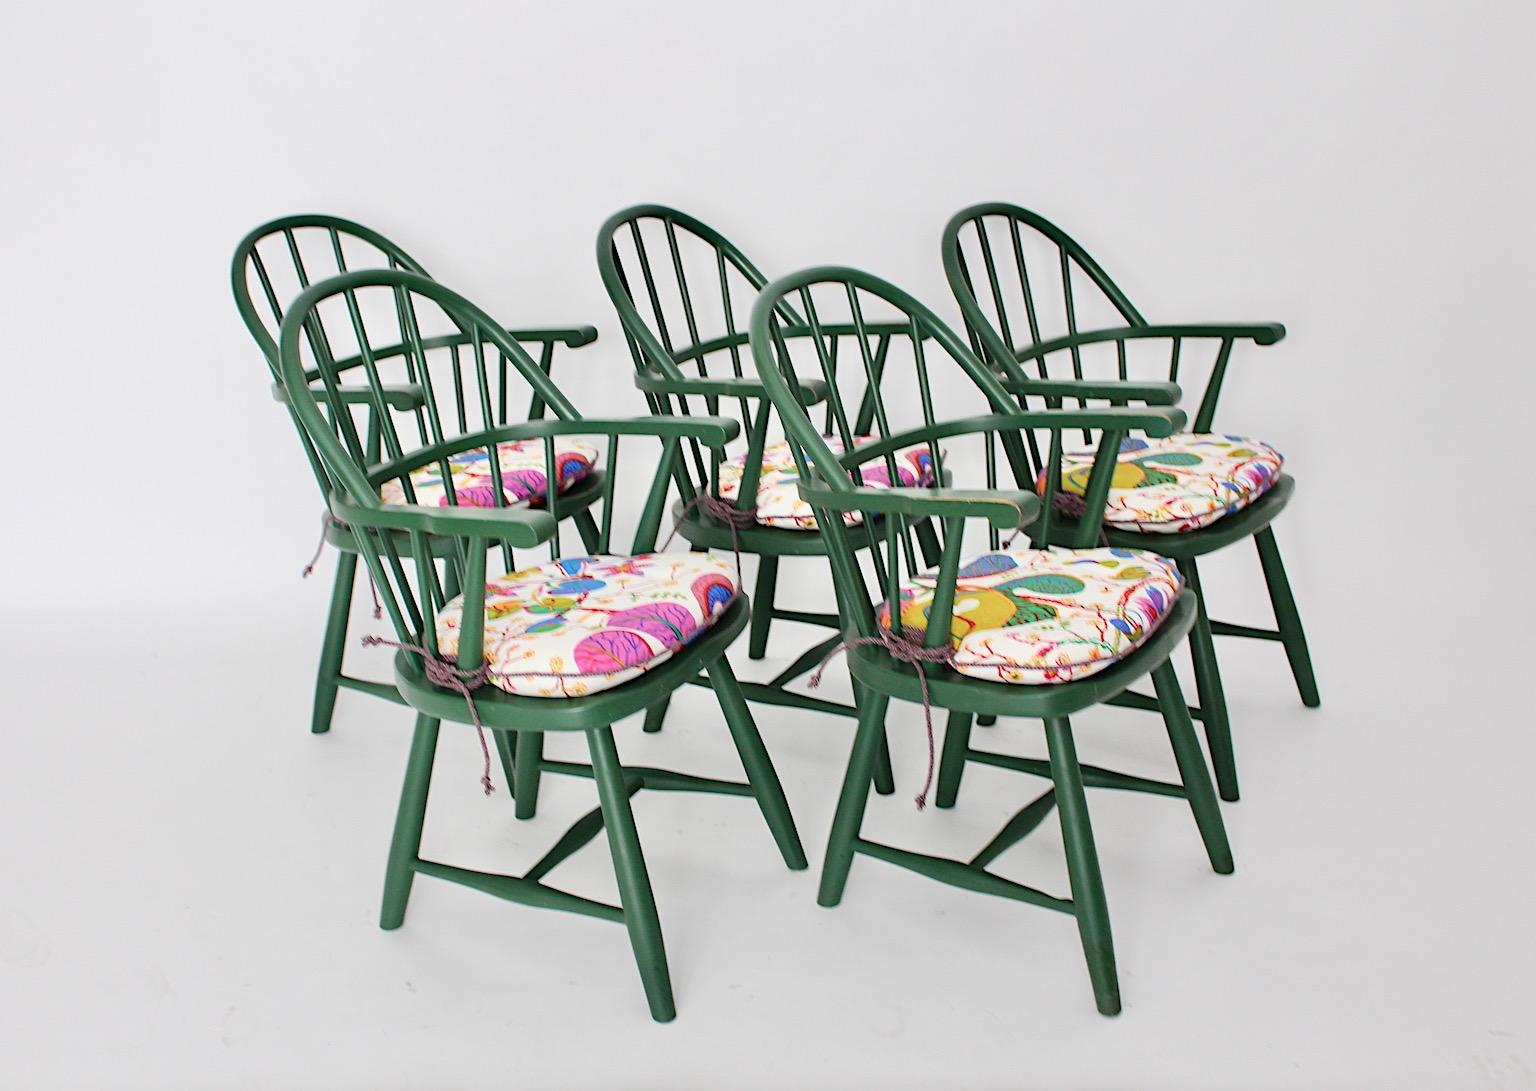 Art Deco vintage five ( 5 )  green Windsor chairs or dining room chairs by Josef Frank for Haus & Garten and executed by Thonet, circa 1925. (Labeled underneath)
An amazing set of 5 green Art Deco Windsor chairs which were made of solid beechwood,